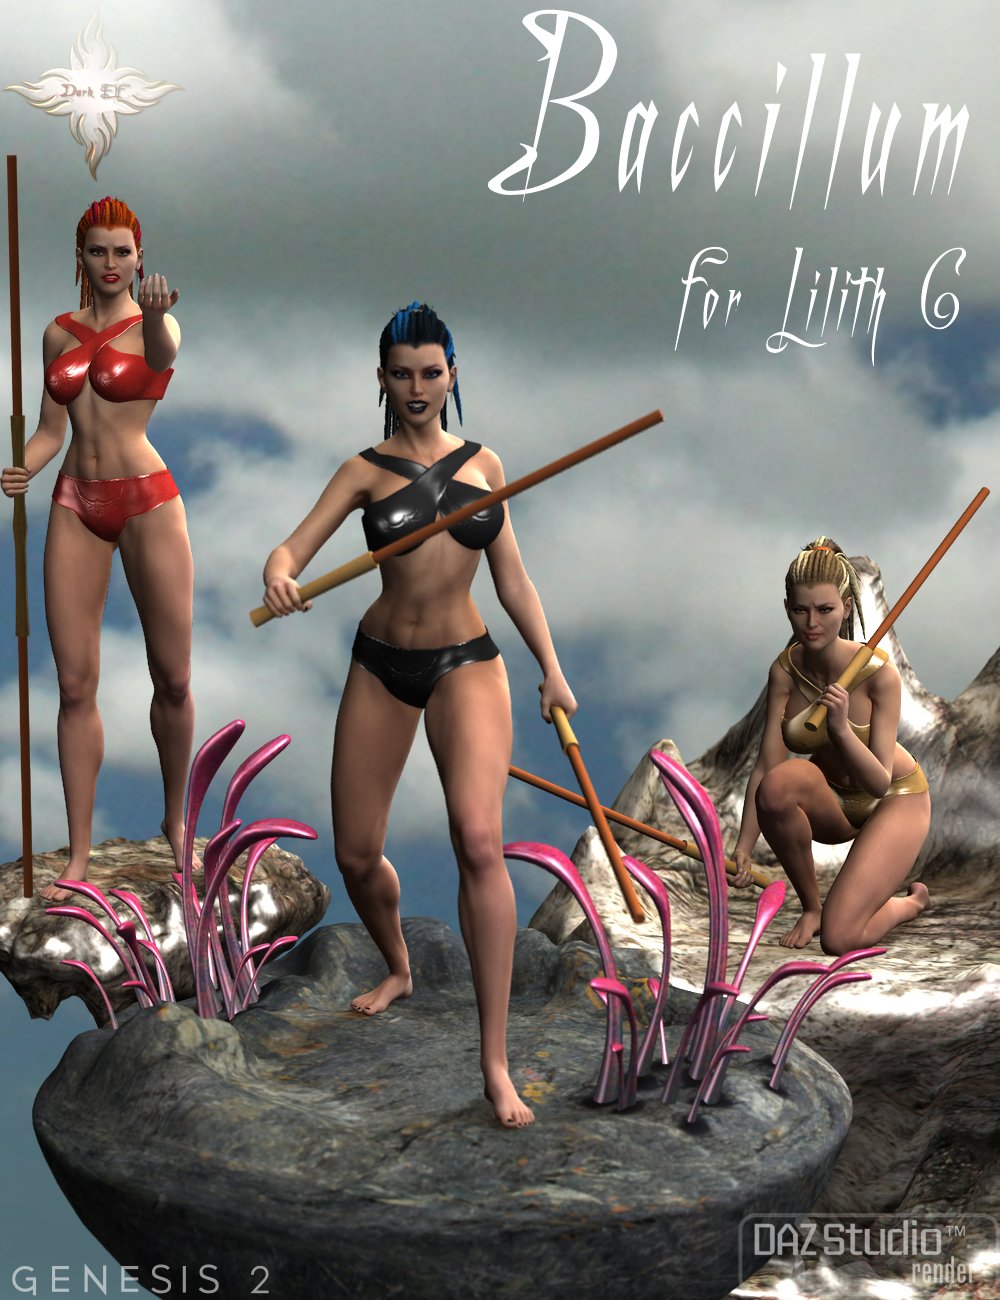 Baccillum Poses for Lilith 6 by: Dark-Elf, 3D Models by Daz 3D